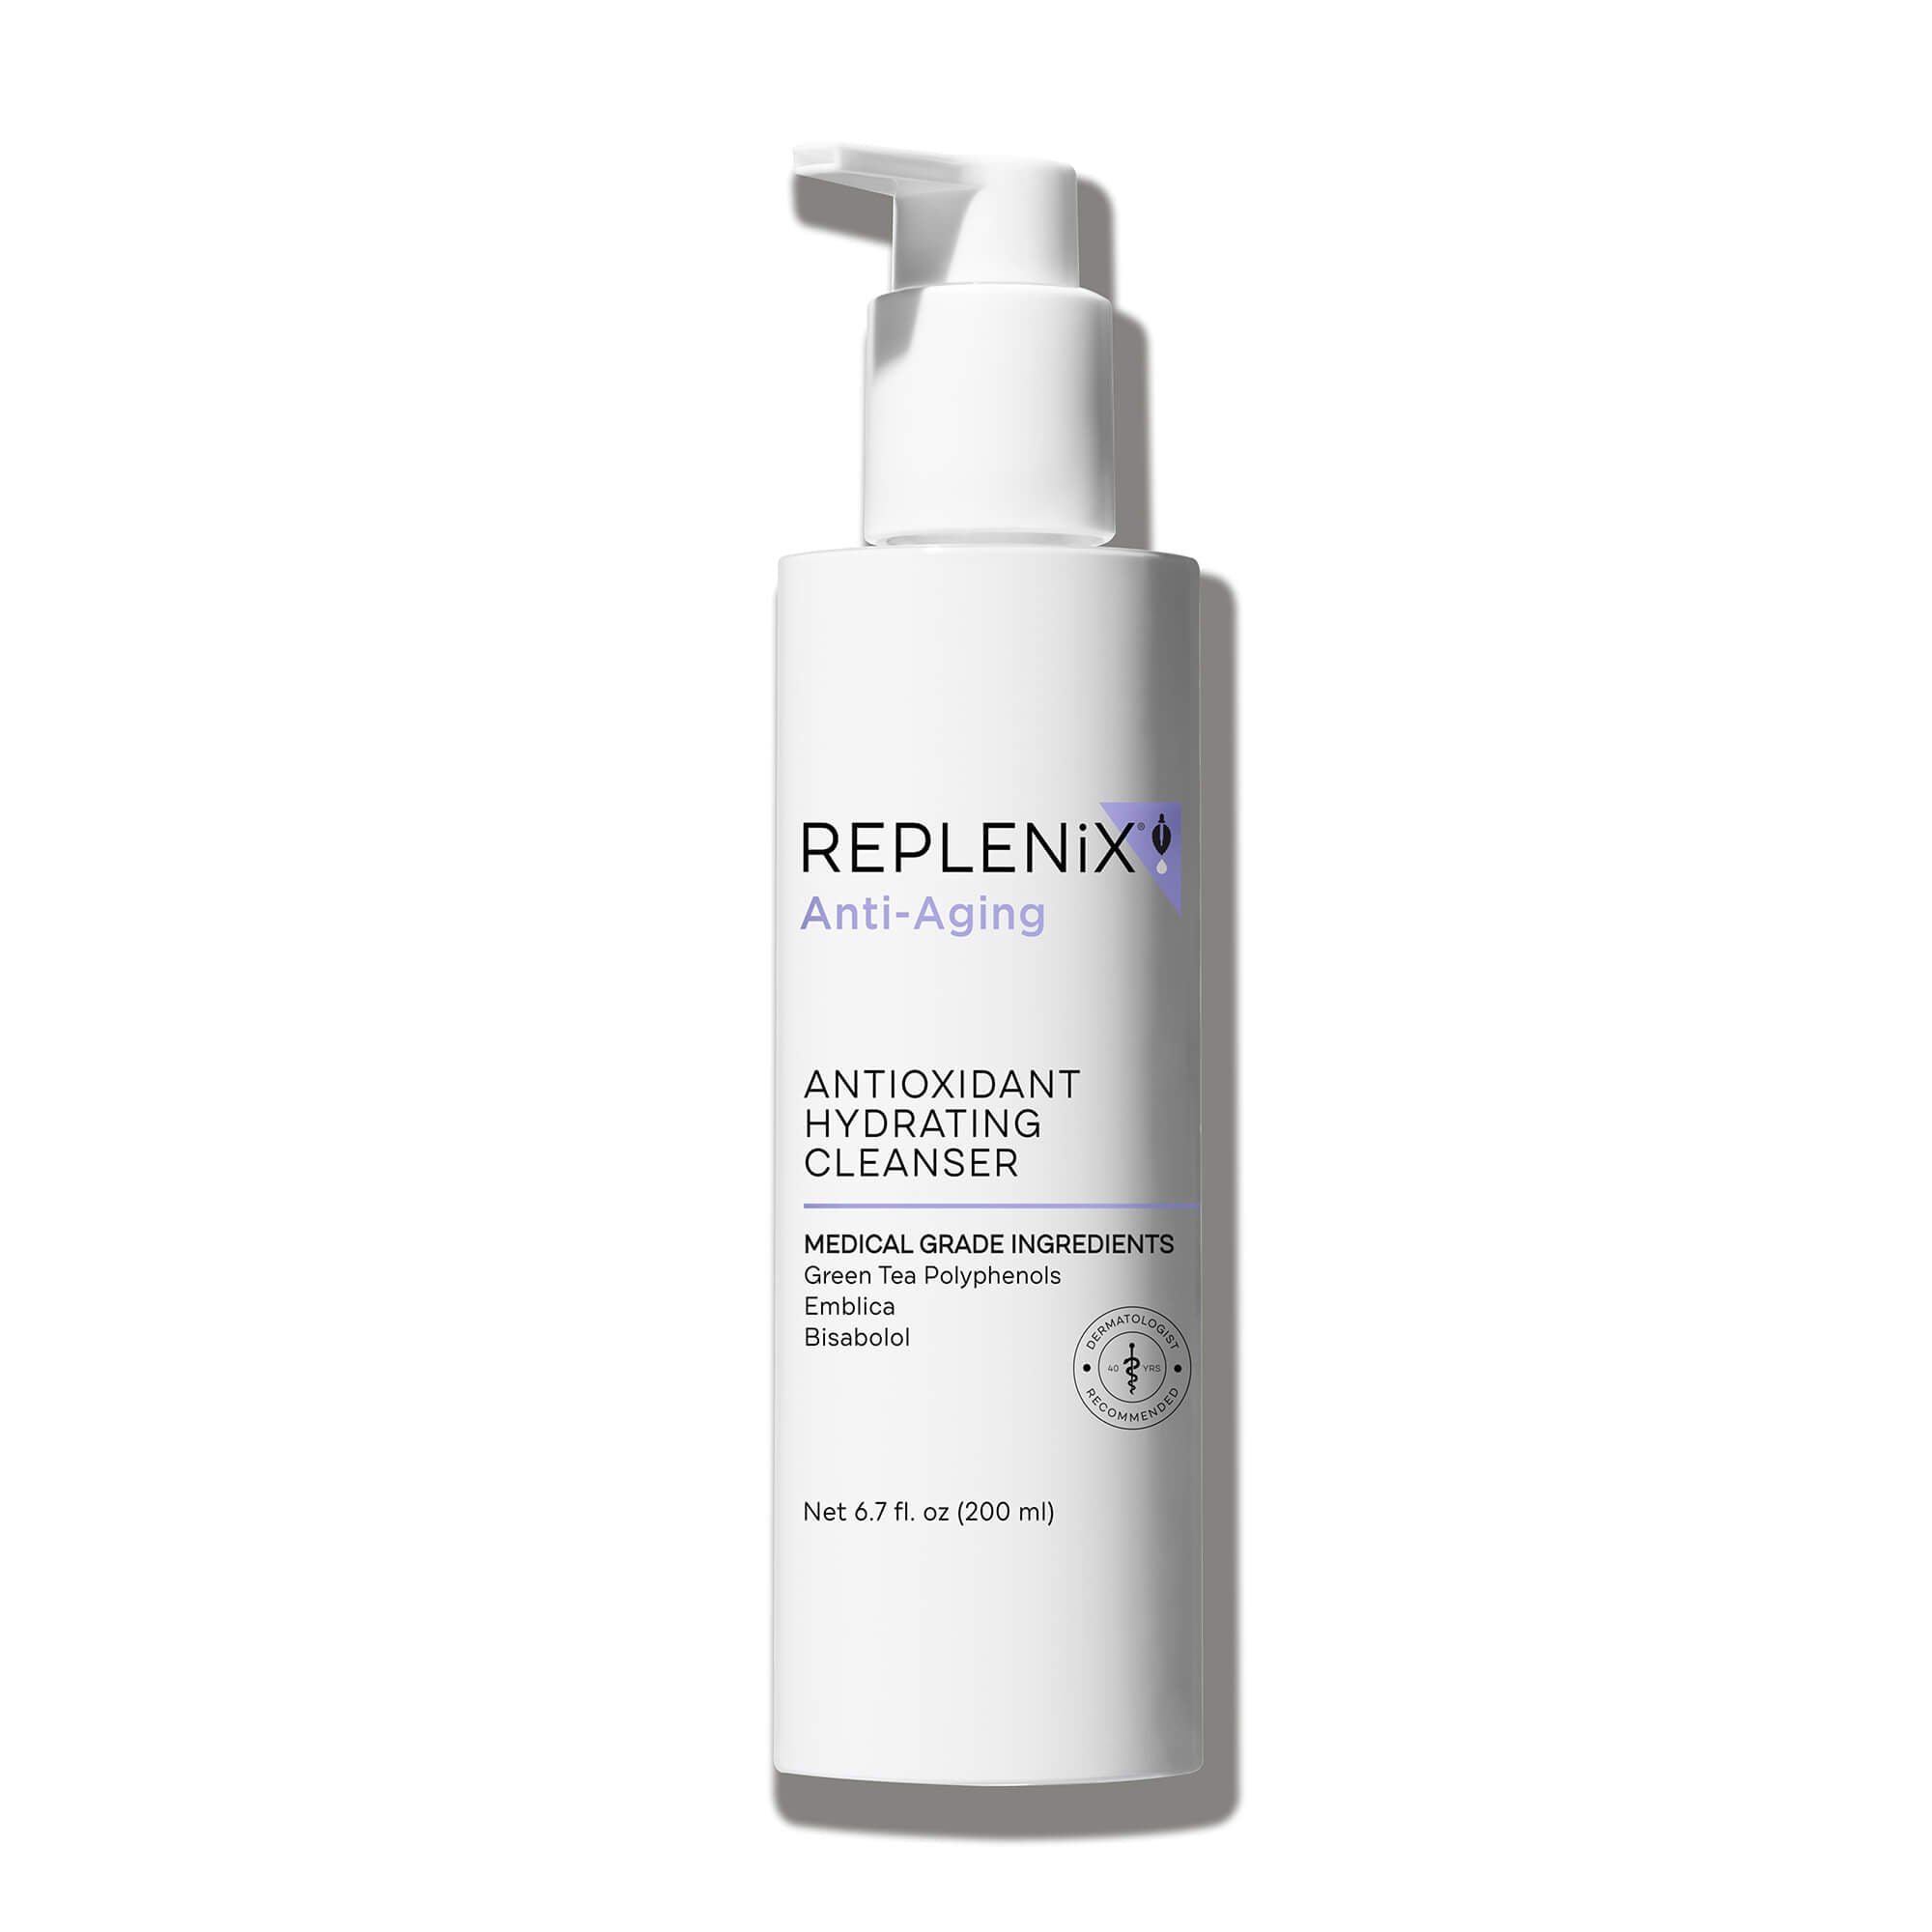 Image of Antioxidant Hydrating Cleanser